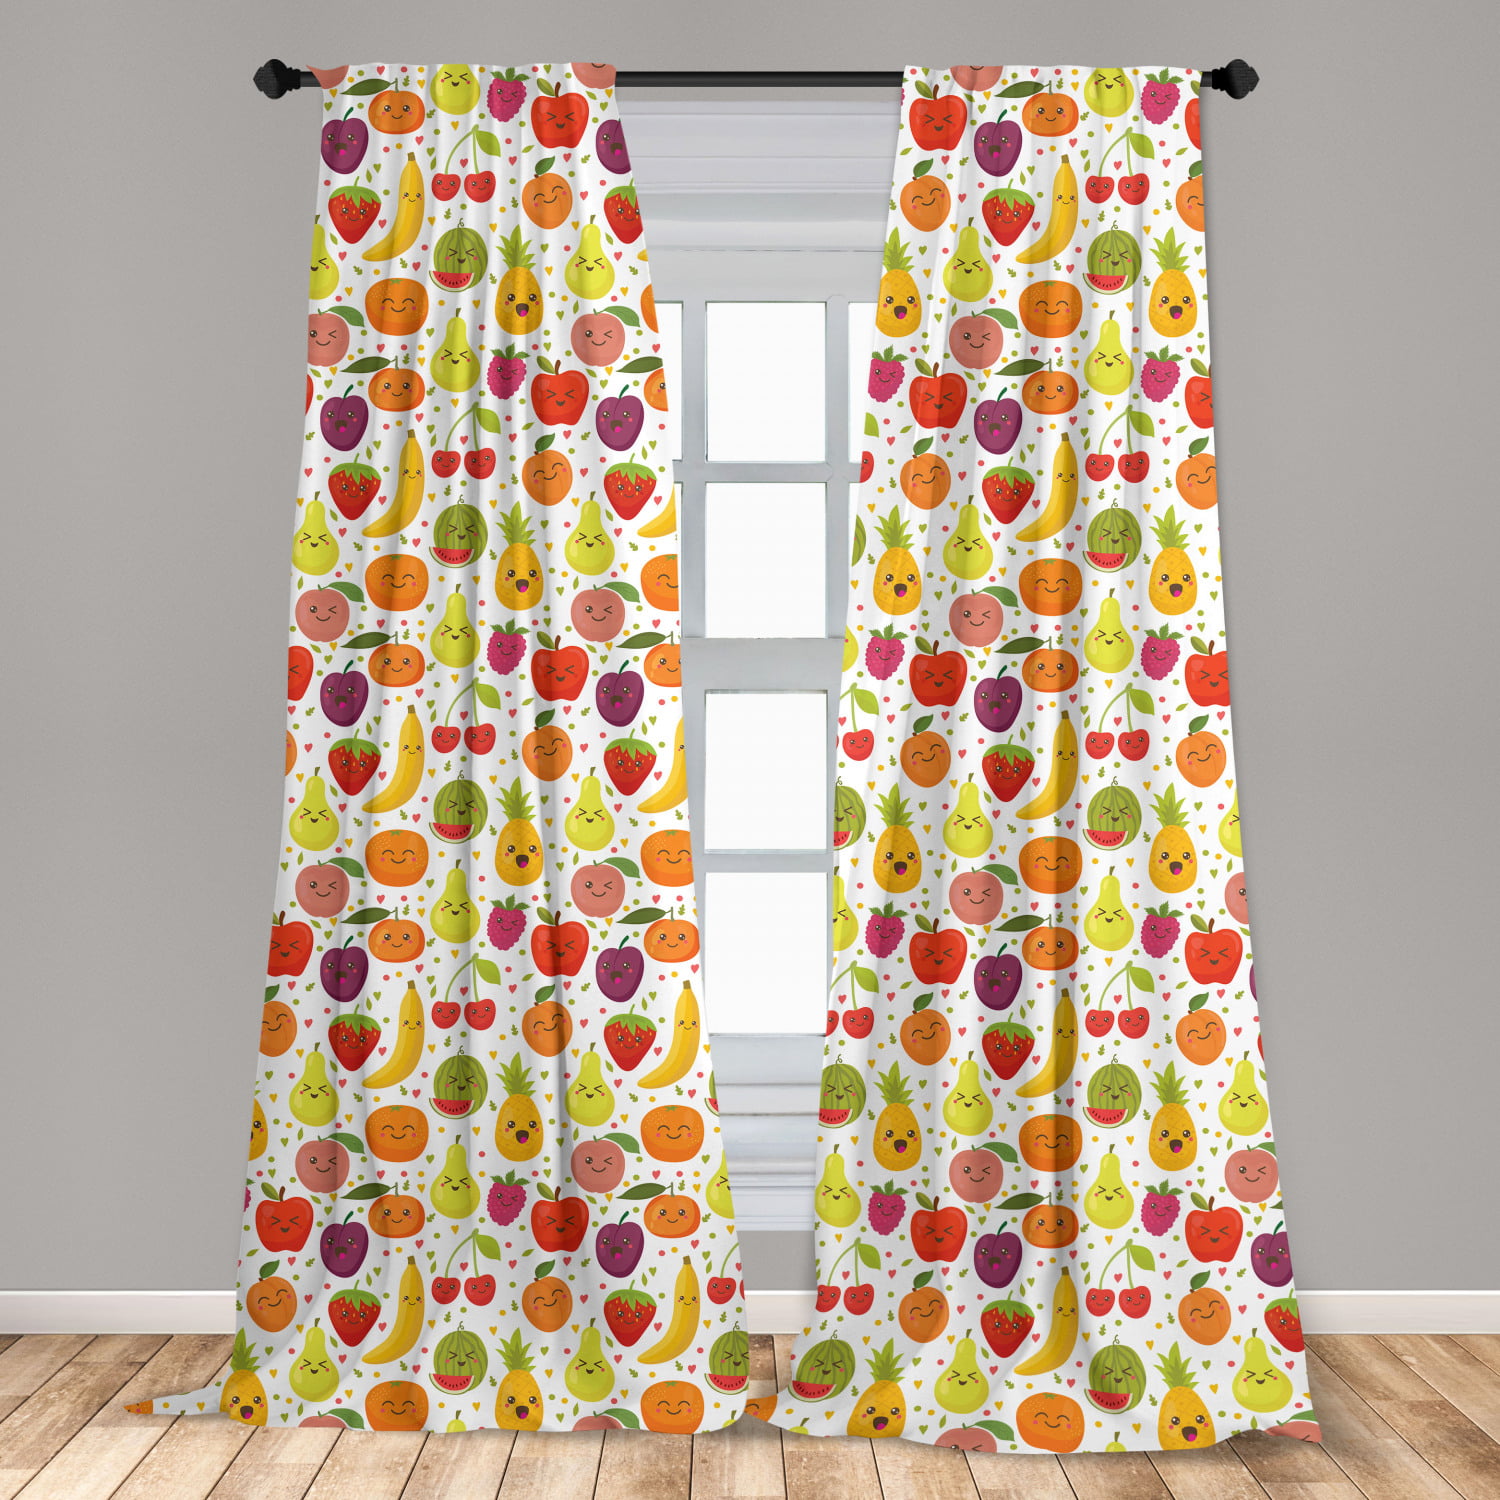 Fruit Theme Microfiber Curtains 2 Panel Set Living Room Bedroom in 3 Sizes 